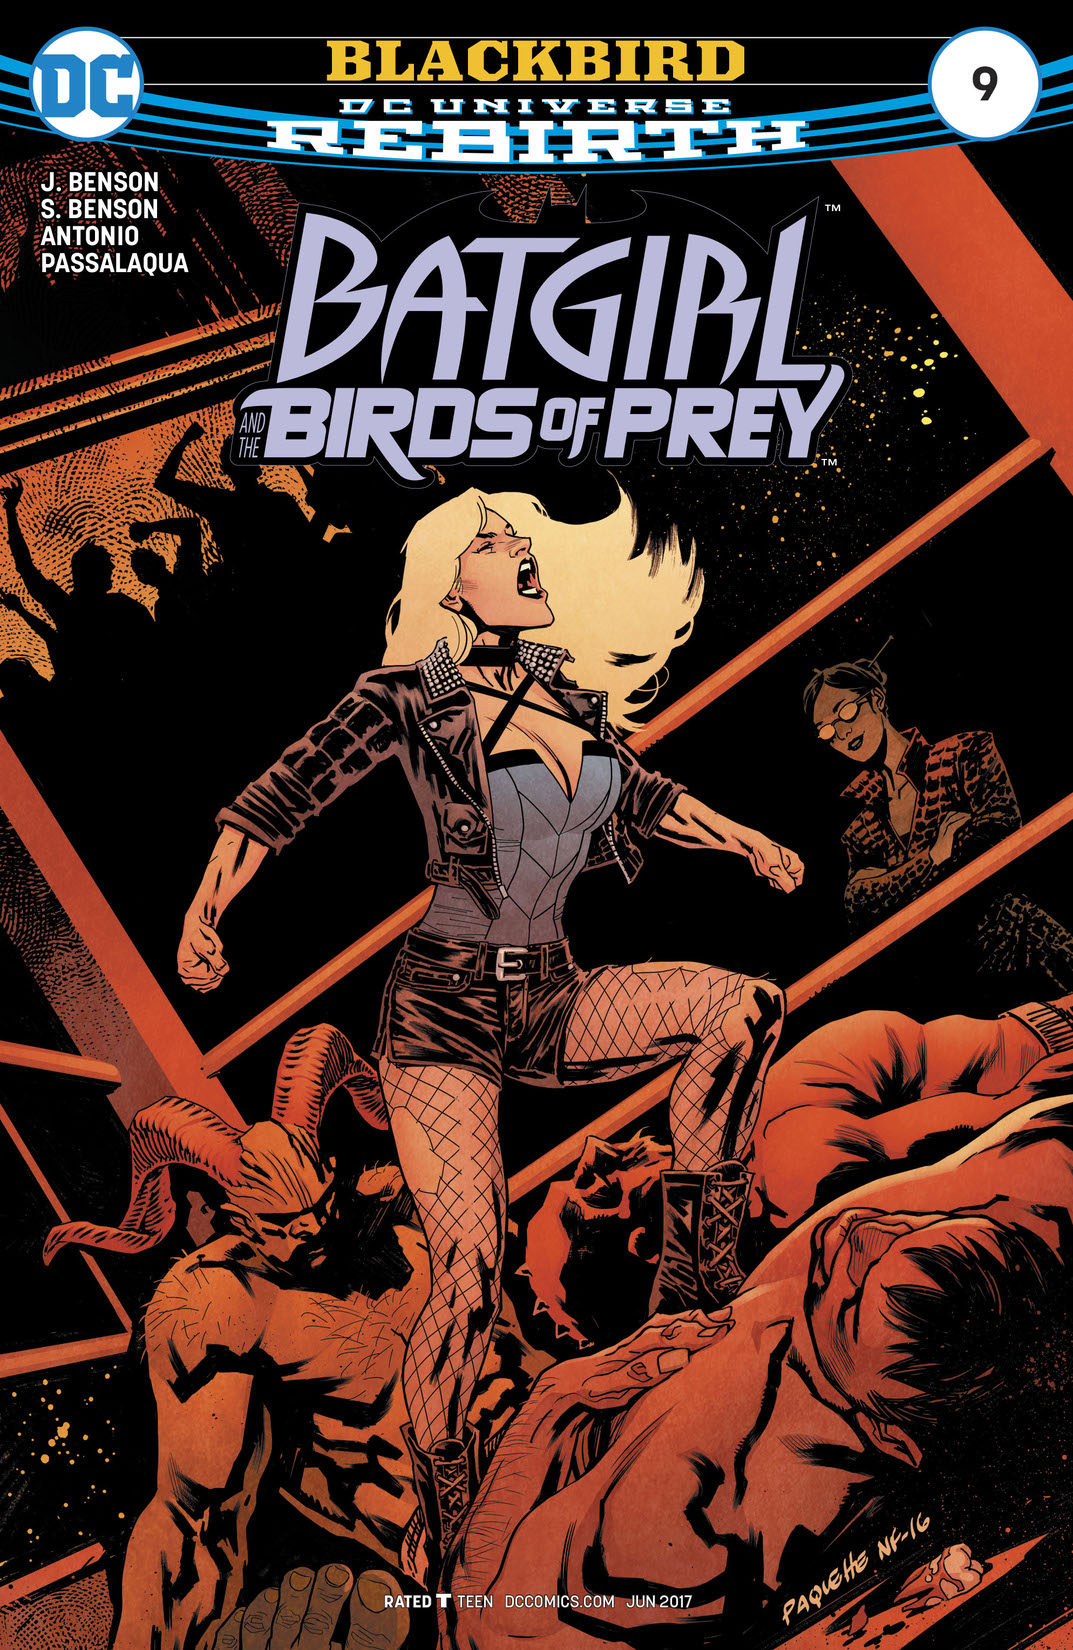 Batgirl and the Birds of Prey #9 preview images